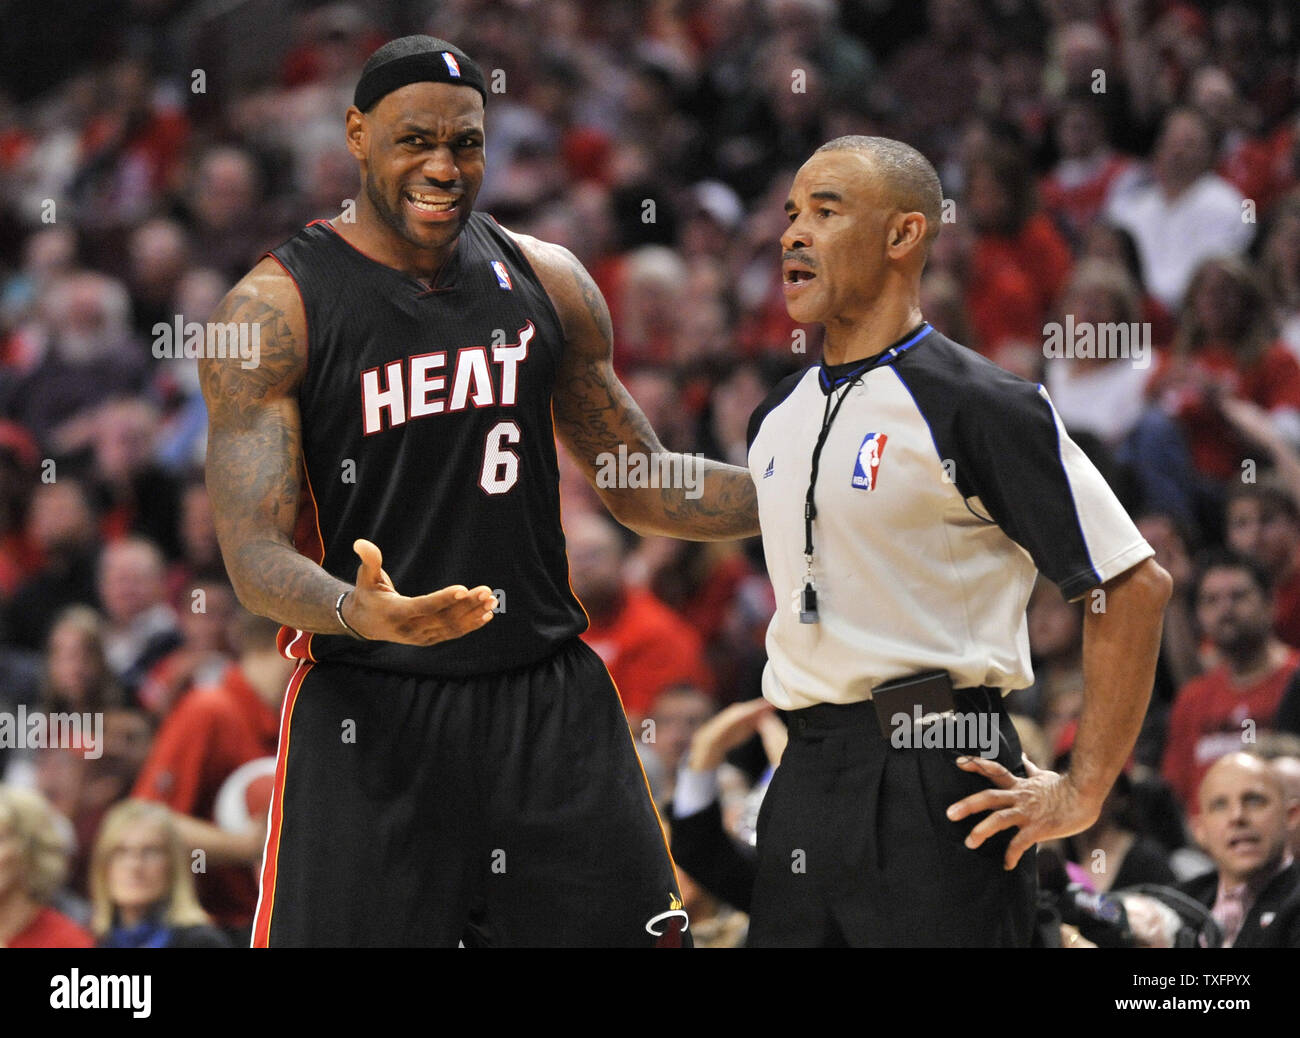 Miami Heat forward LeBron James (L) argues with referee Dan Crawford during  the fourth quarter of game 1 of the Eastern Conference Finals against the  Chicago Bulls at the United Center in